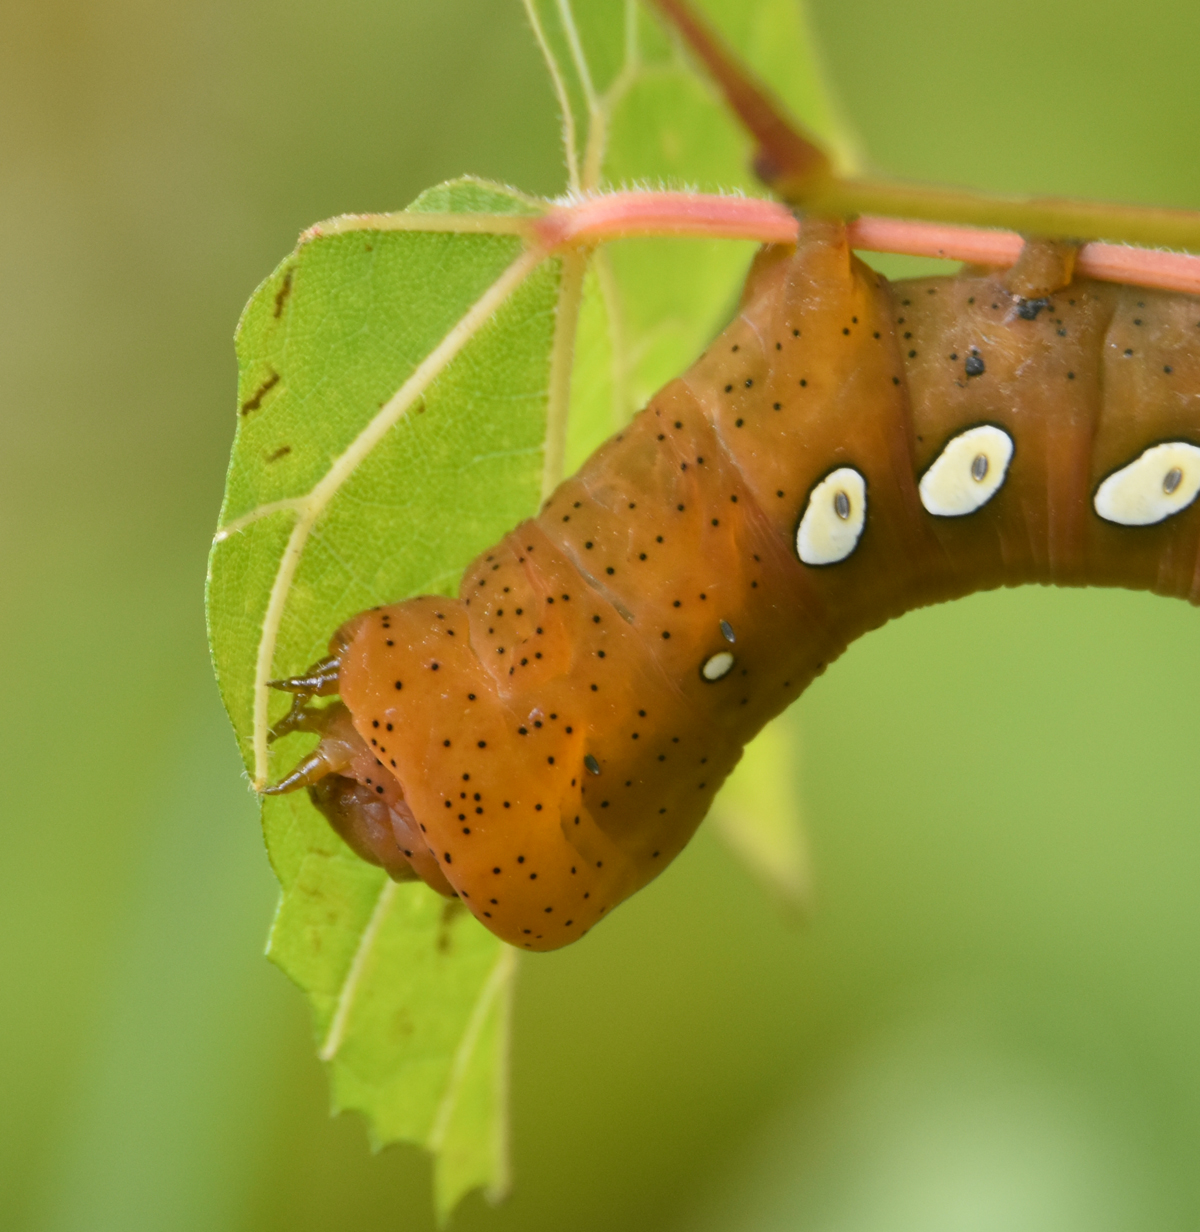 What Big Smooth Caterpillar Is Rusty Brown With 5 White Eye Spots Or Green With Small Black Spots Divided With Vertical White Lines Natural Crooks Ramblings